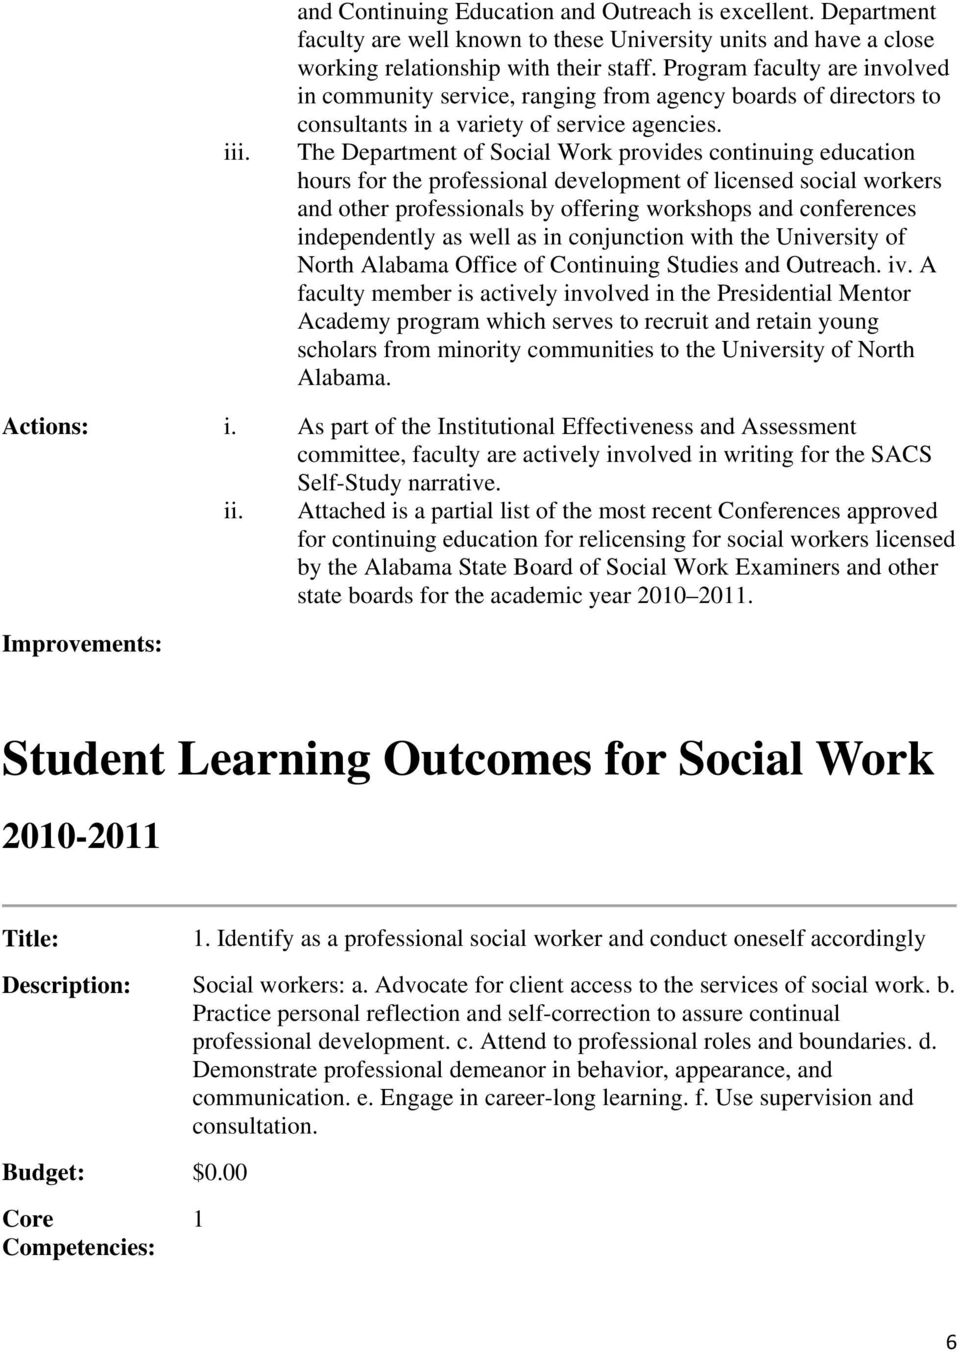 The Department of Social Work provides continuing education hours for the professional development of licensed social workers and other professionals by offering workshops and conferences